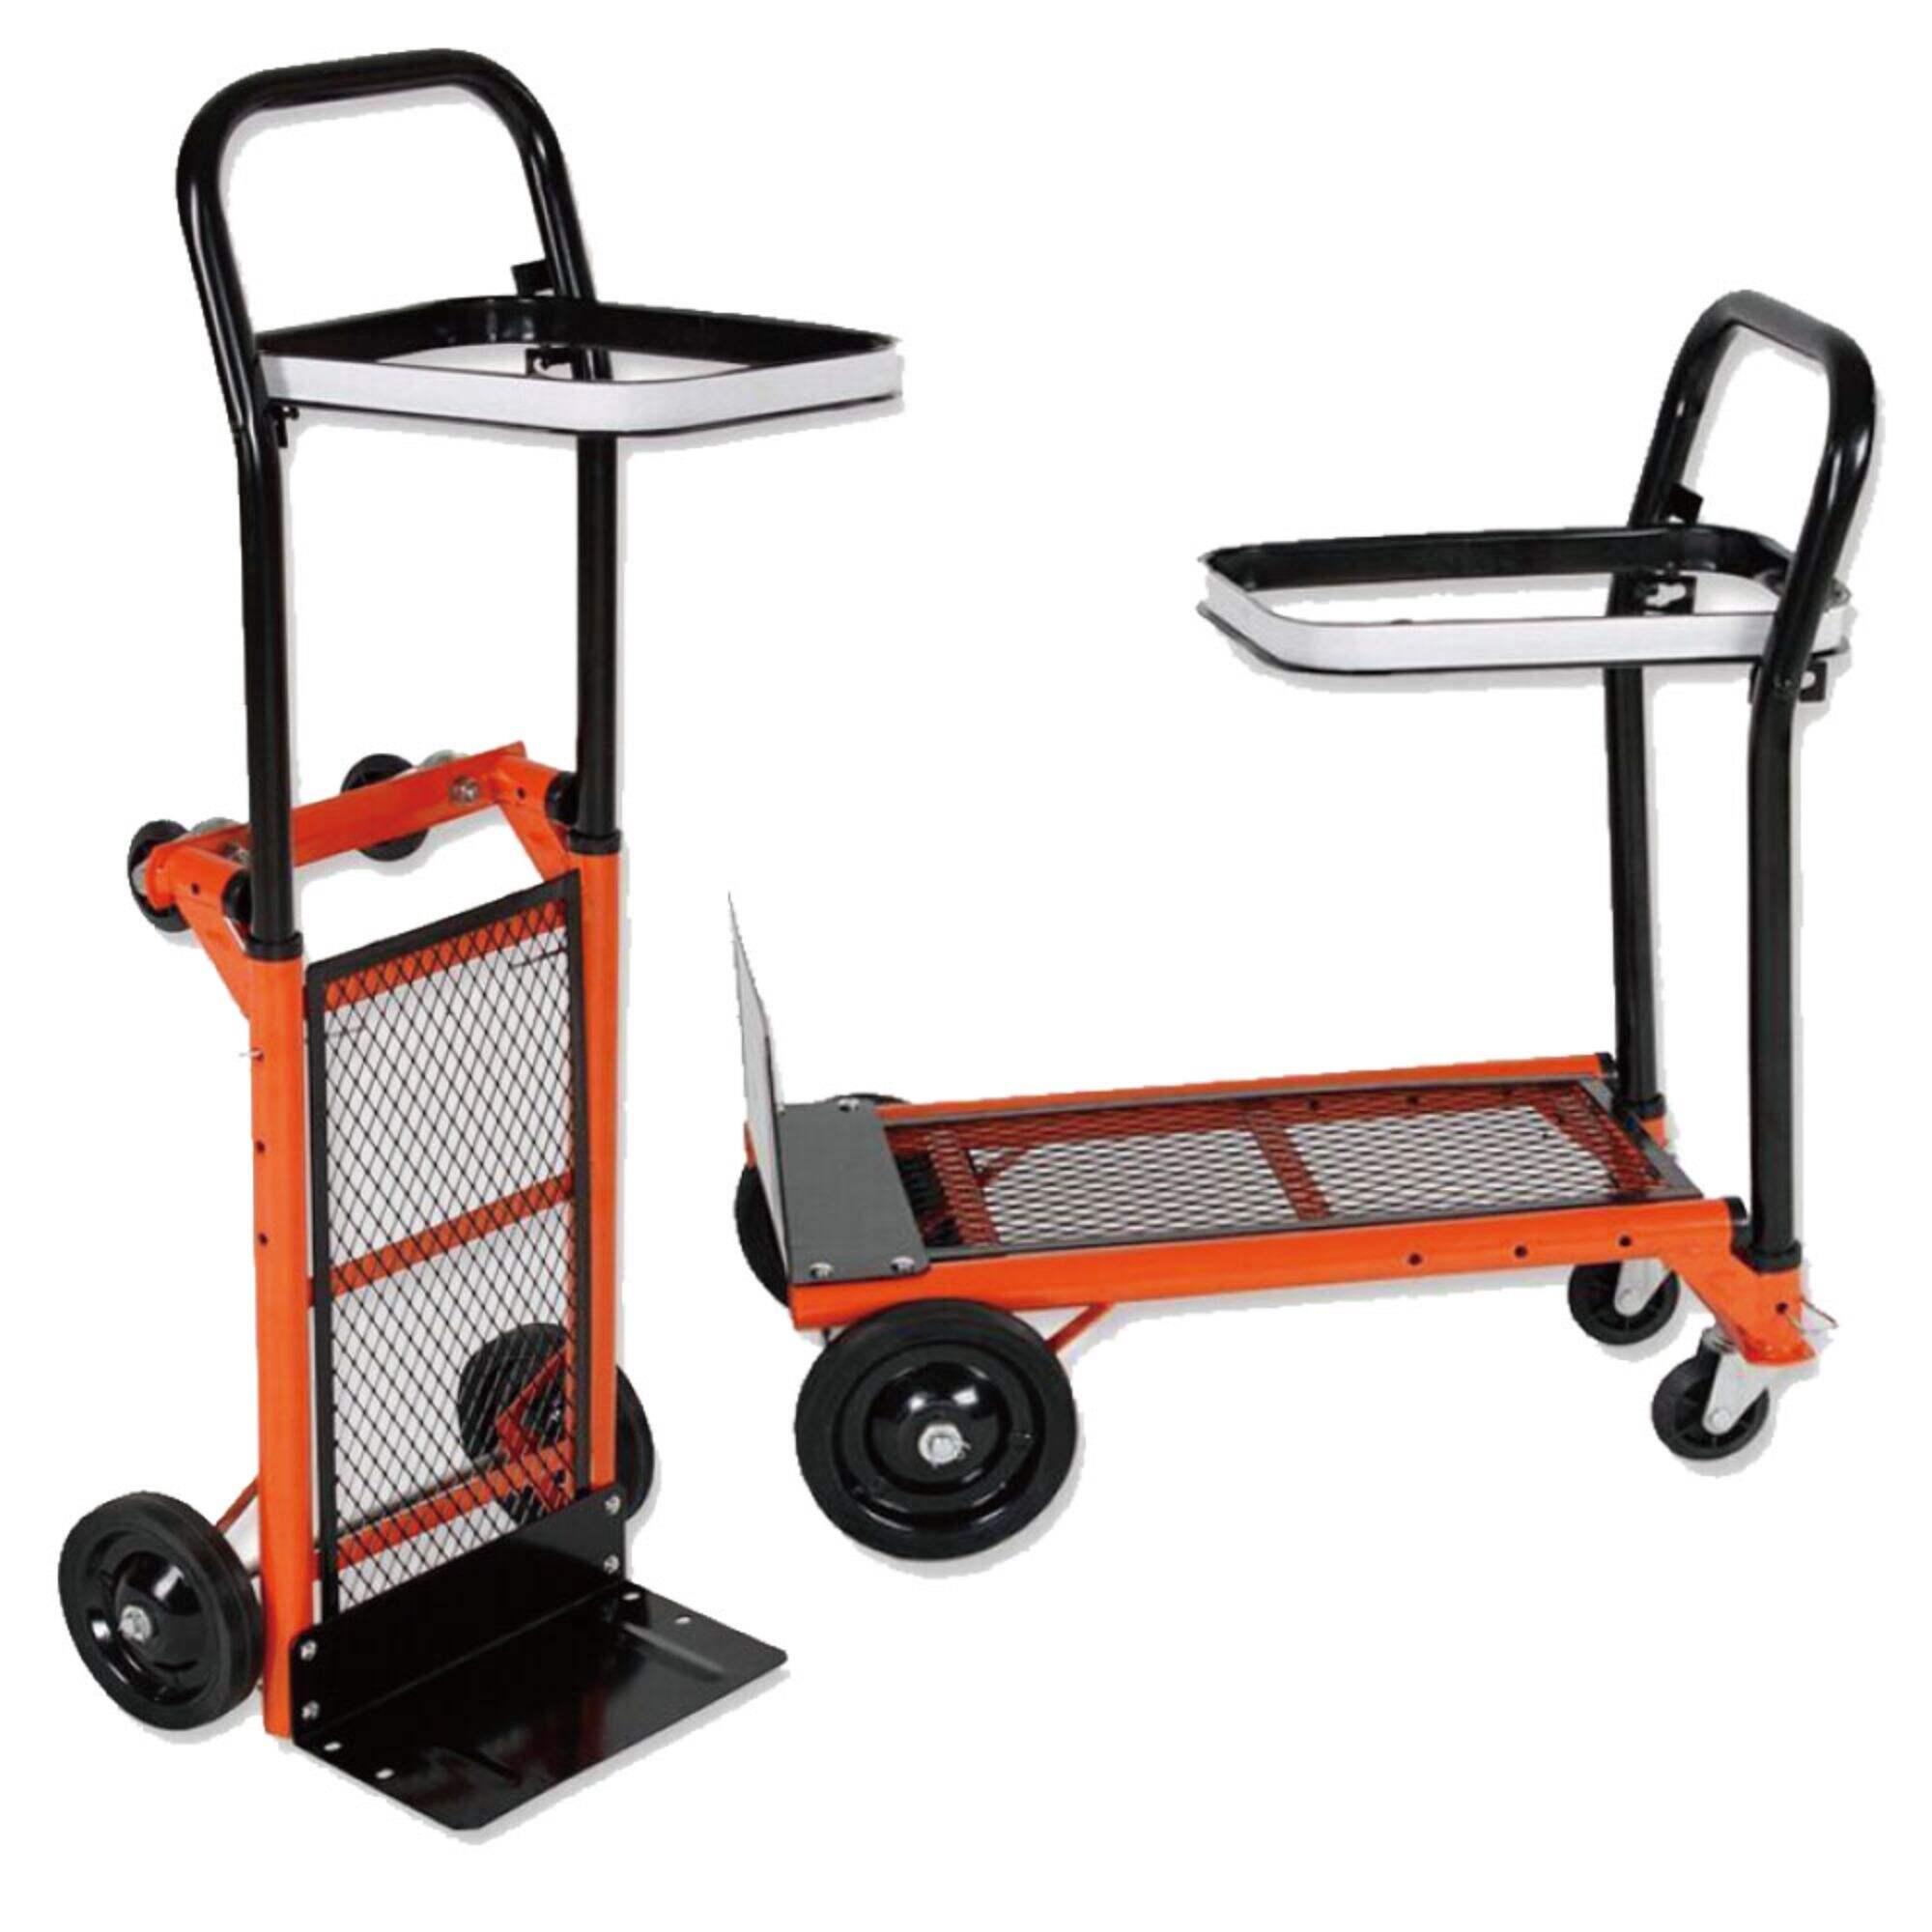 HT1500 2 in 1 Hand Truck, Folding Hand Dolly Cart, with 6x1.25 inch Solid Wheel